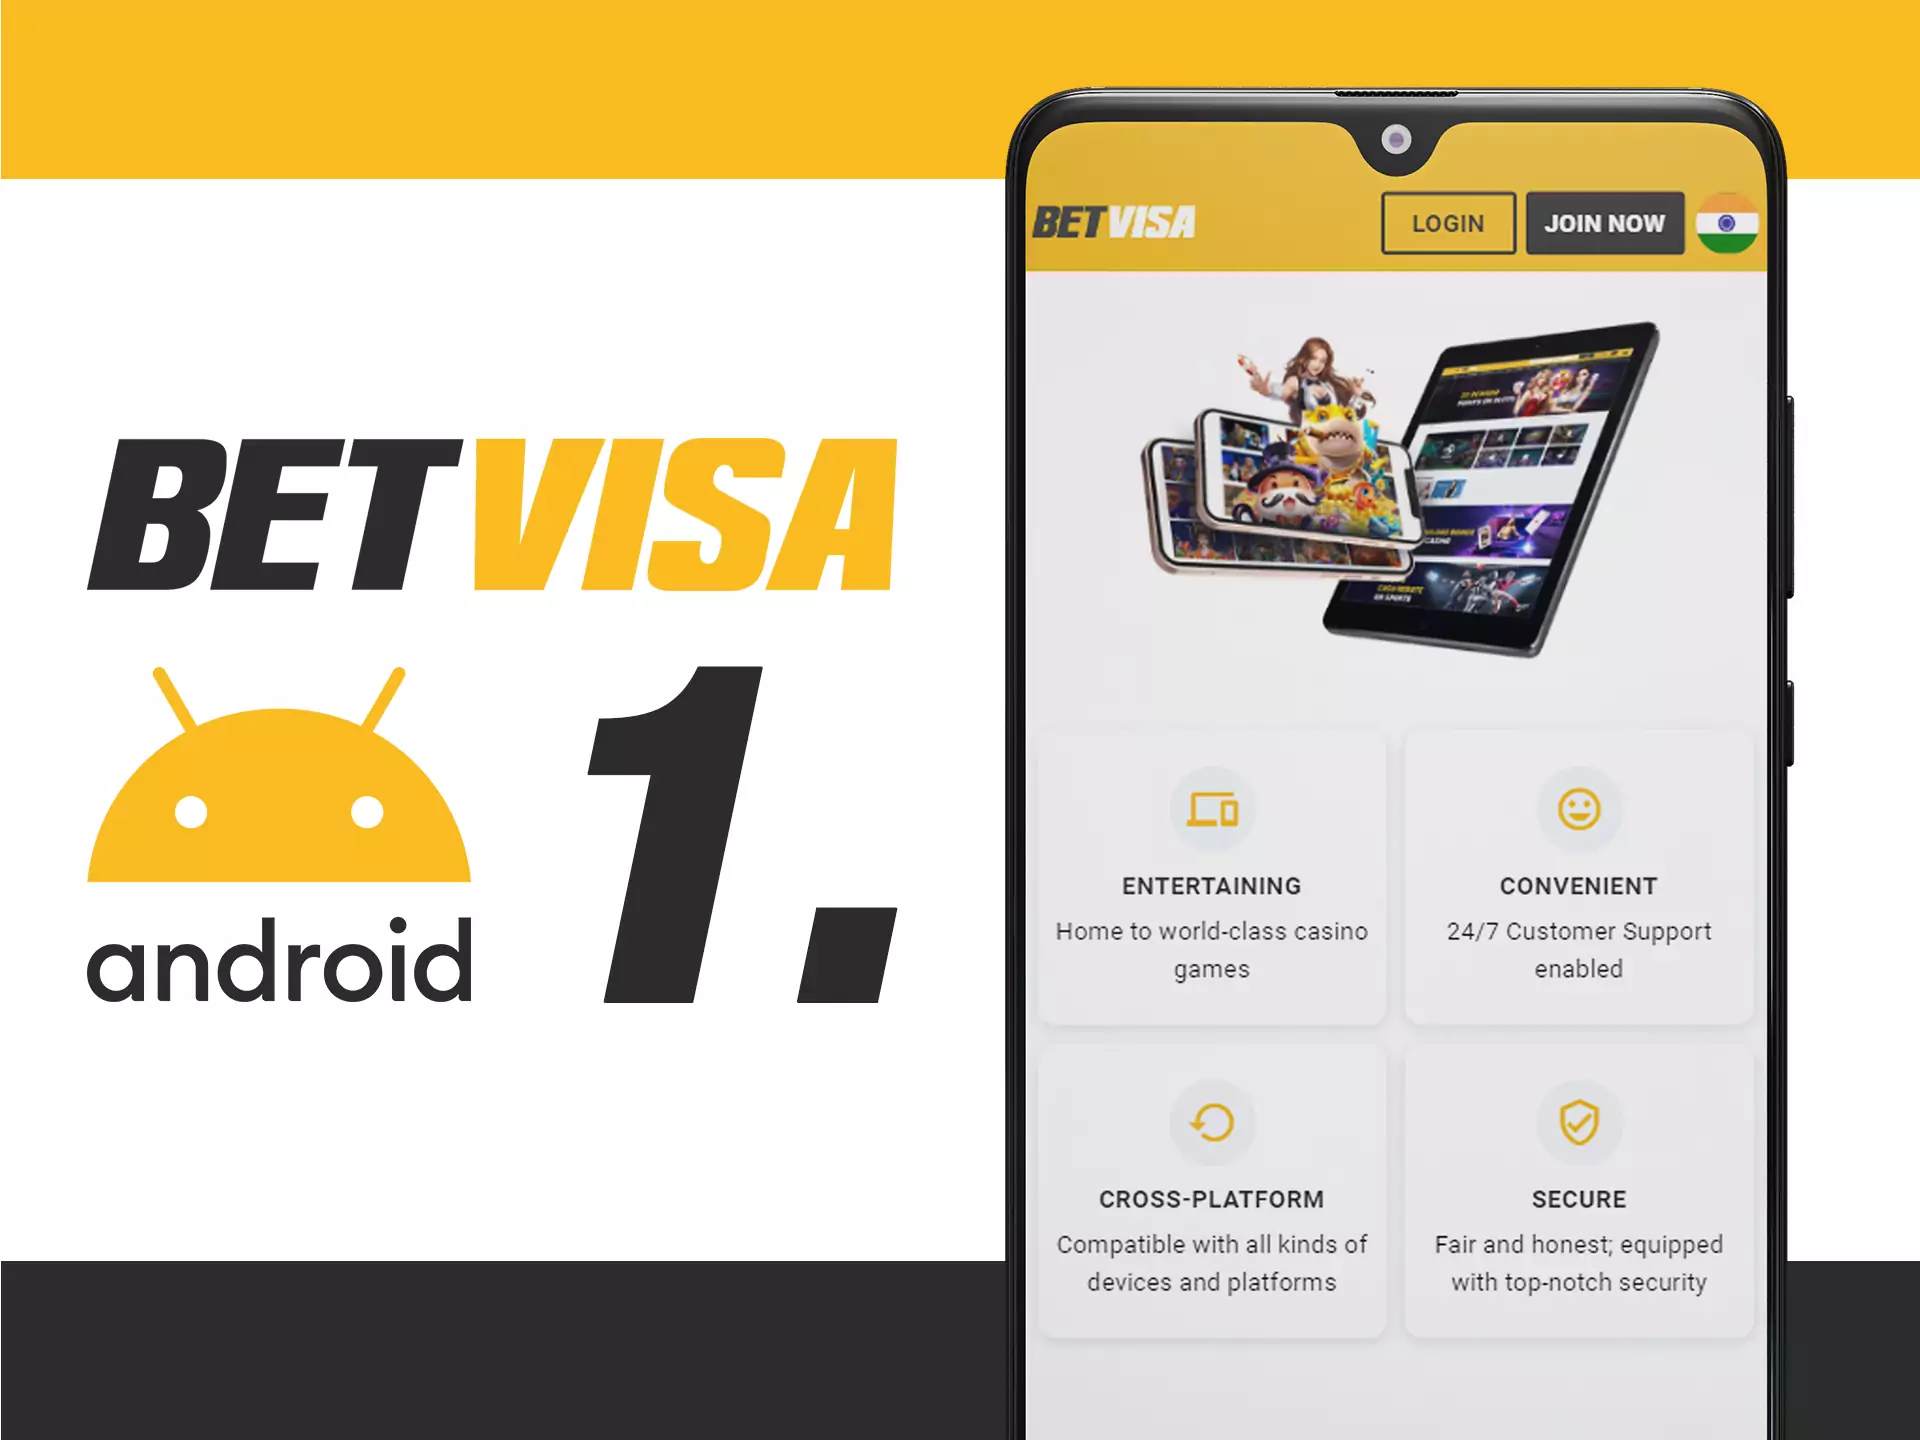 Download Betvisa app on your Android device.